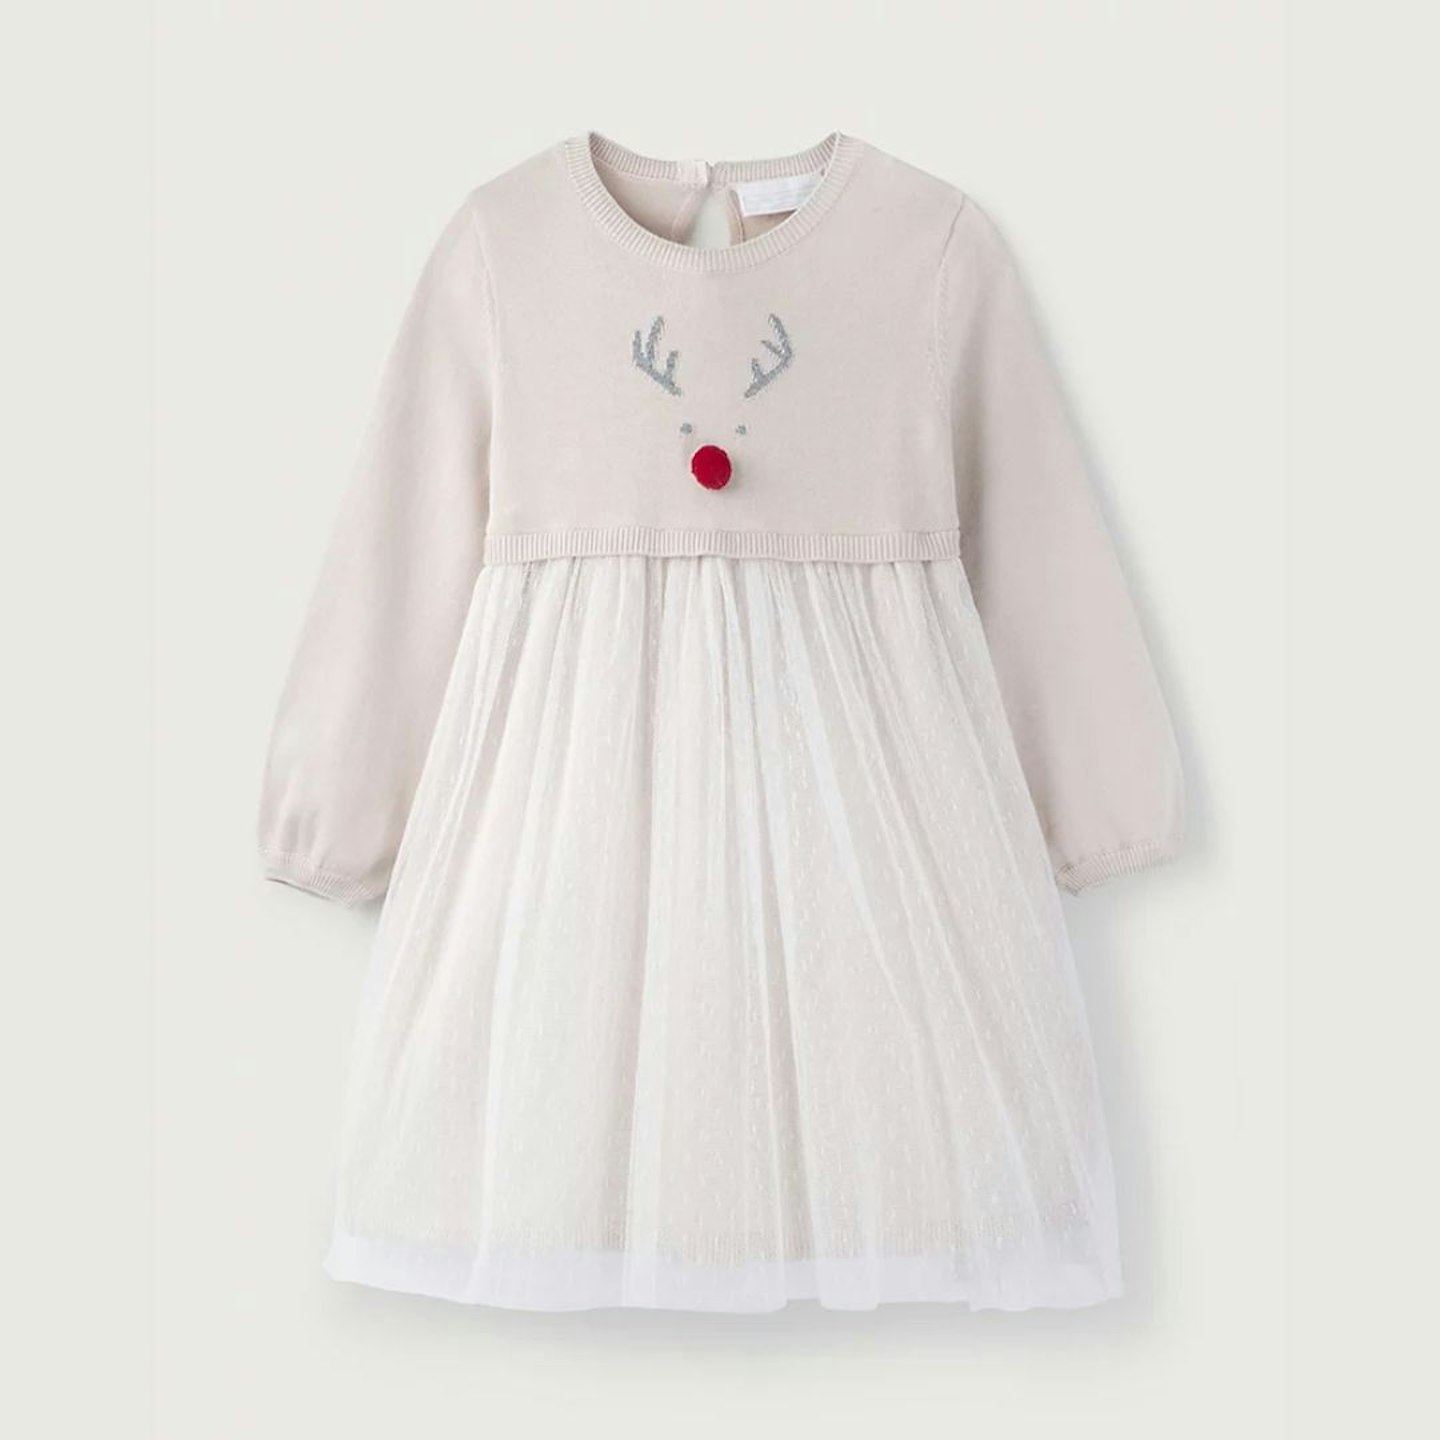 Best Christmas outfit Jingles Reindeer Knit + Tulle Dress